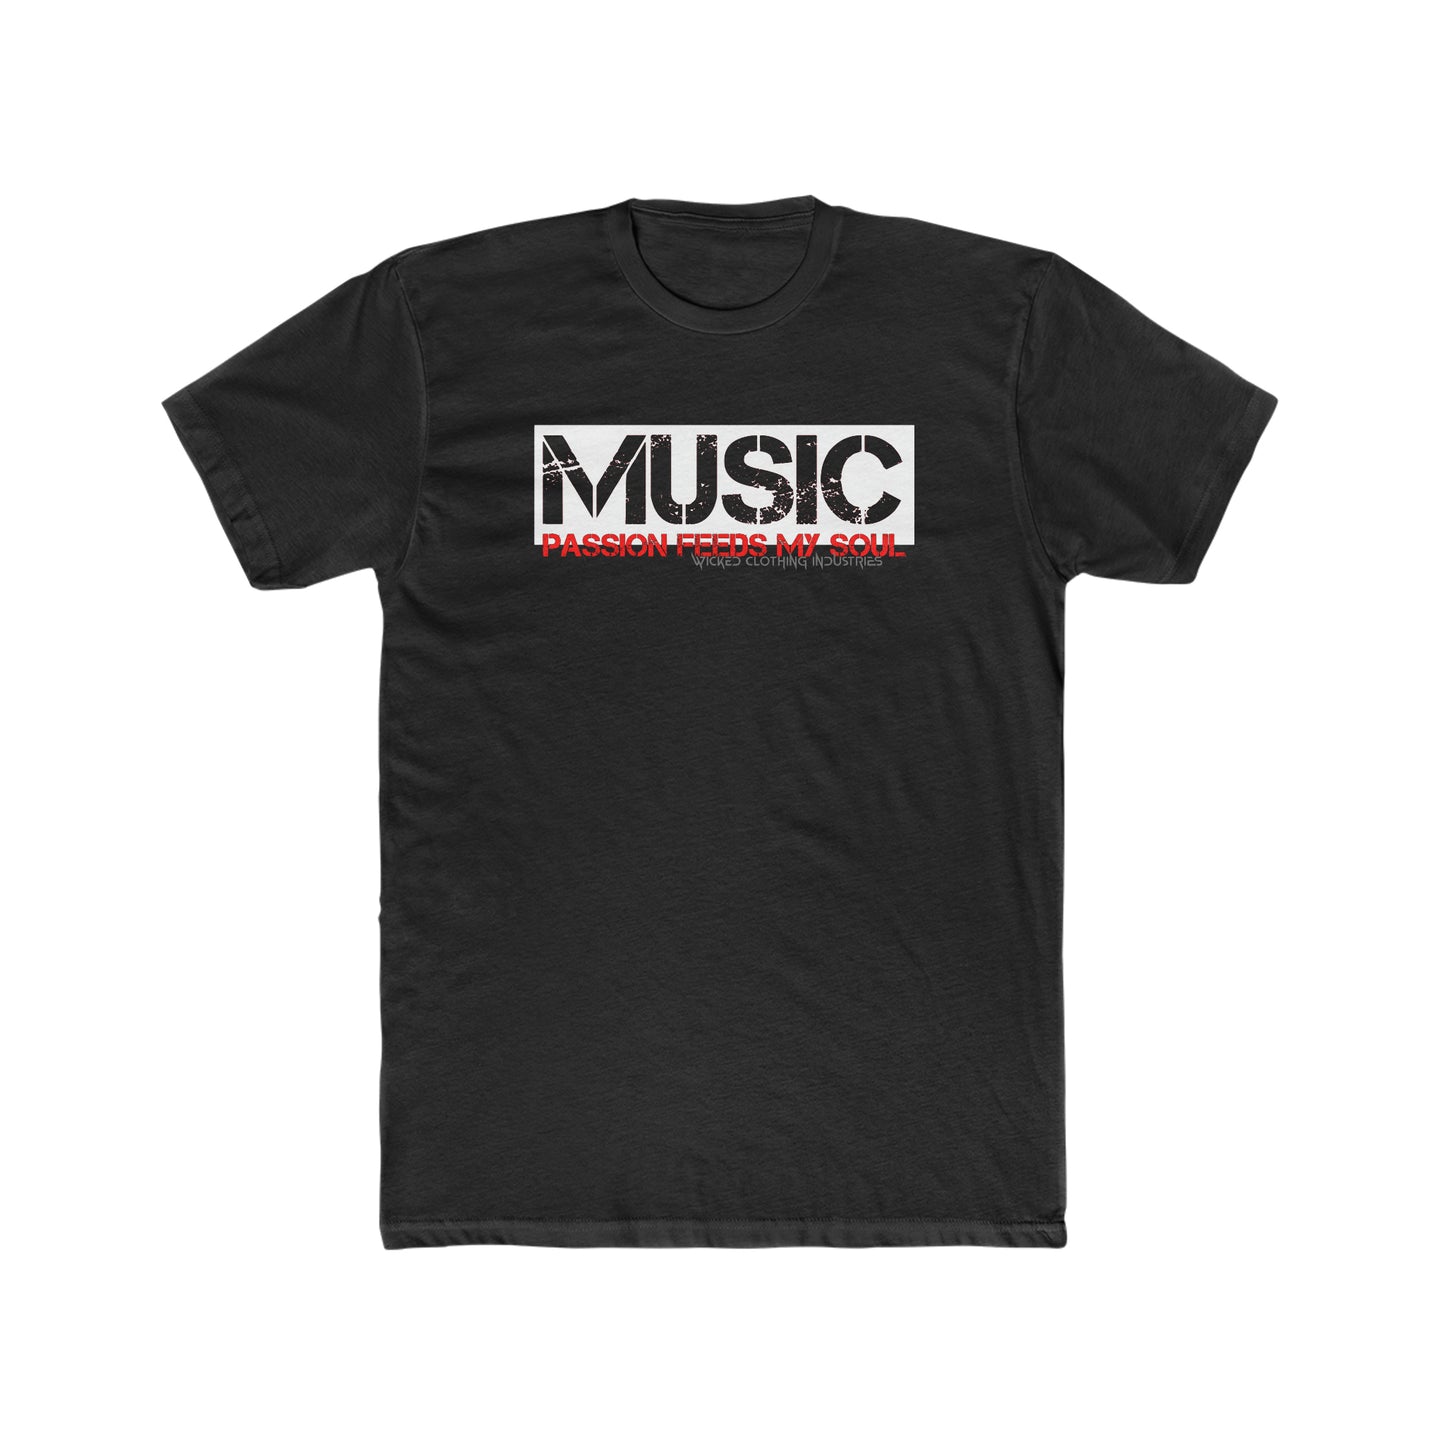 MUSIC / Passion Feeds My Soul /  Crew Tee